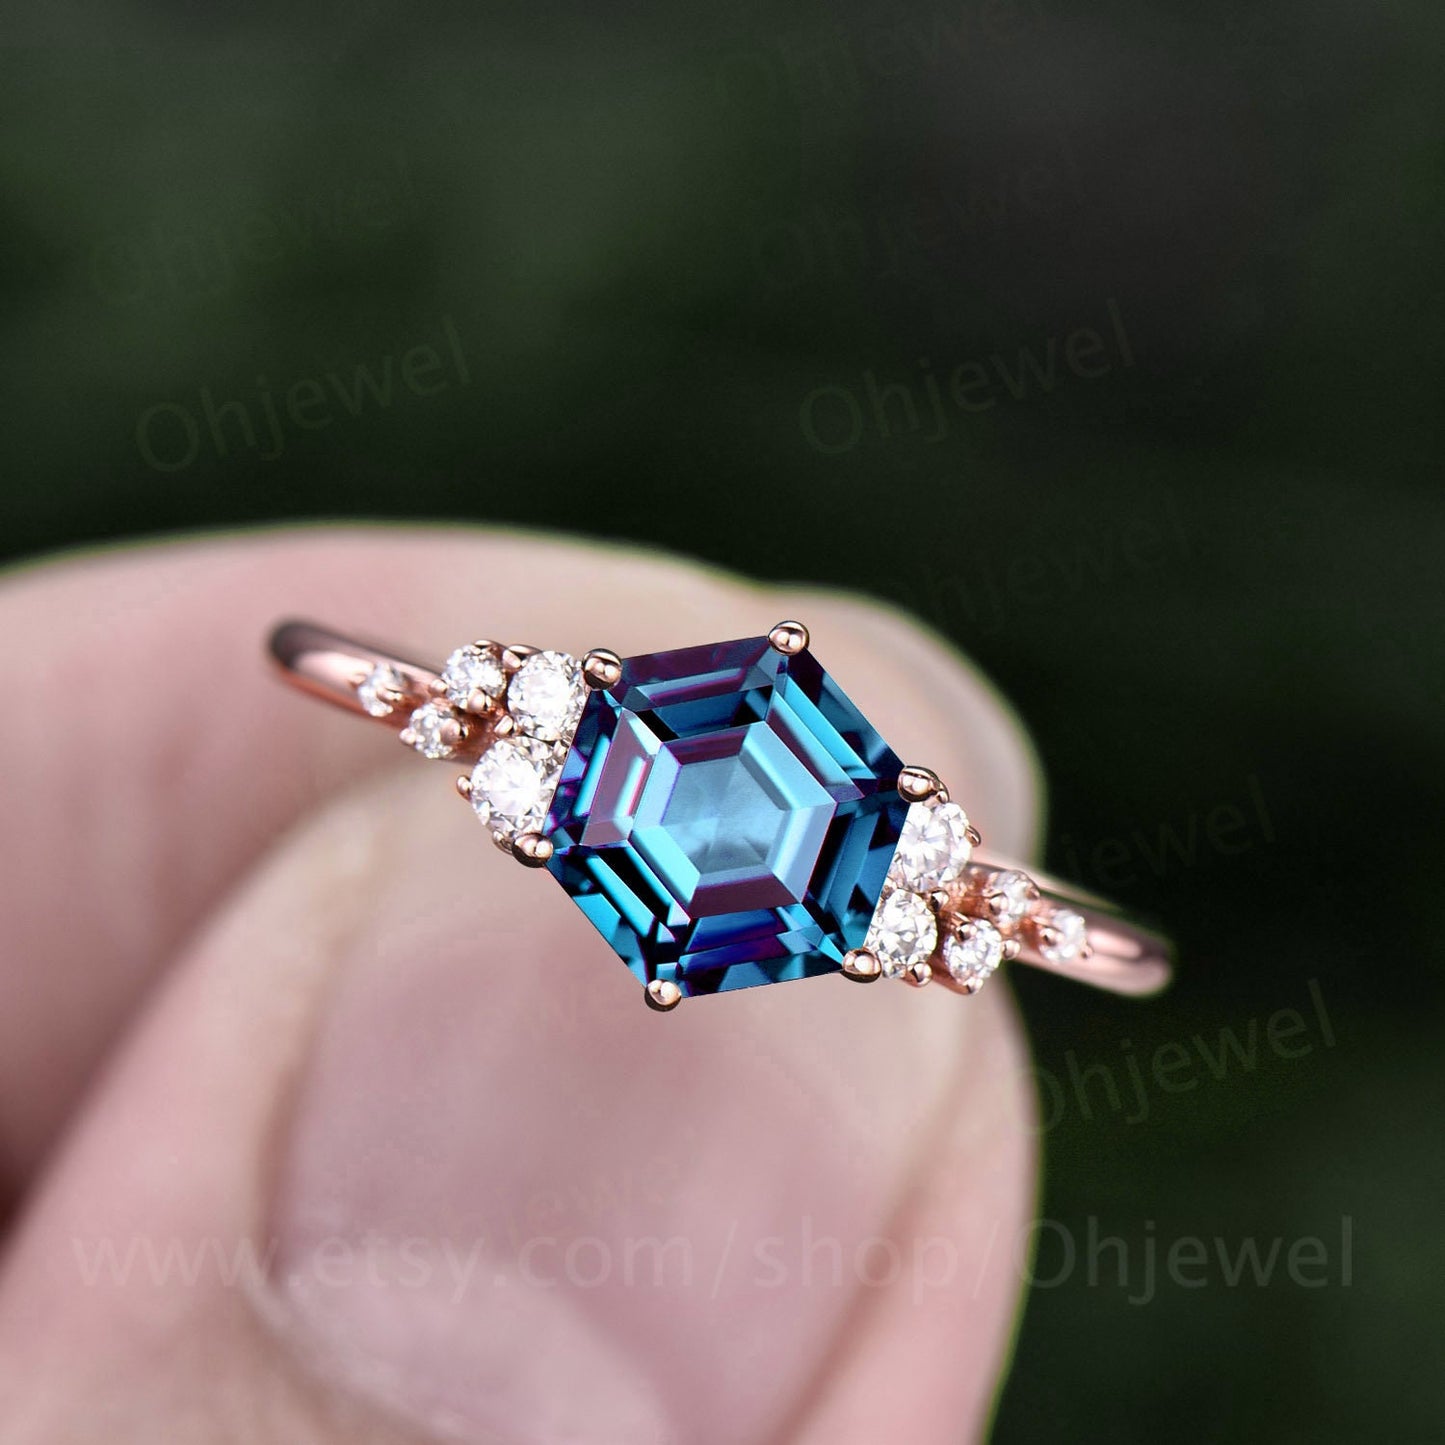 Vintage hexagon cut Alexandrite engagement ring rose gold unique cluster snowdrift diamond engagement ring six prong wedding ring for women